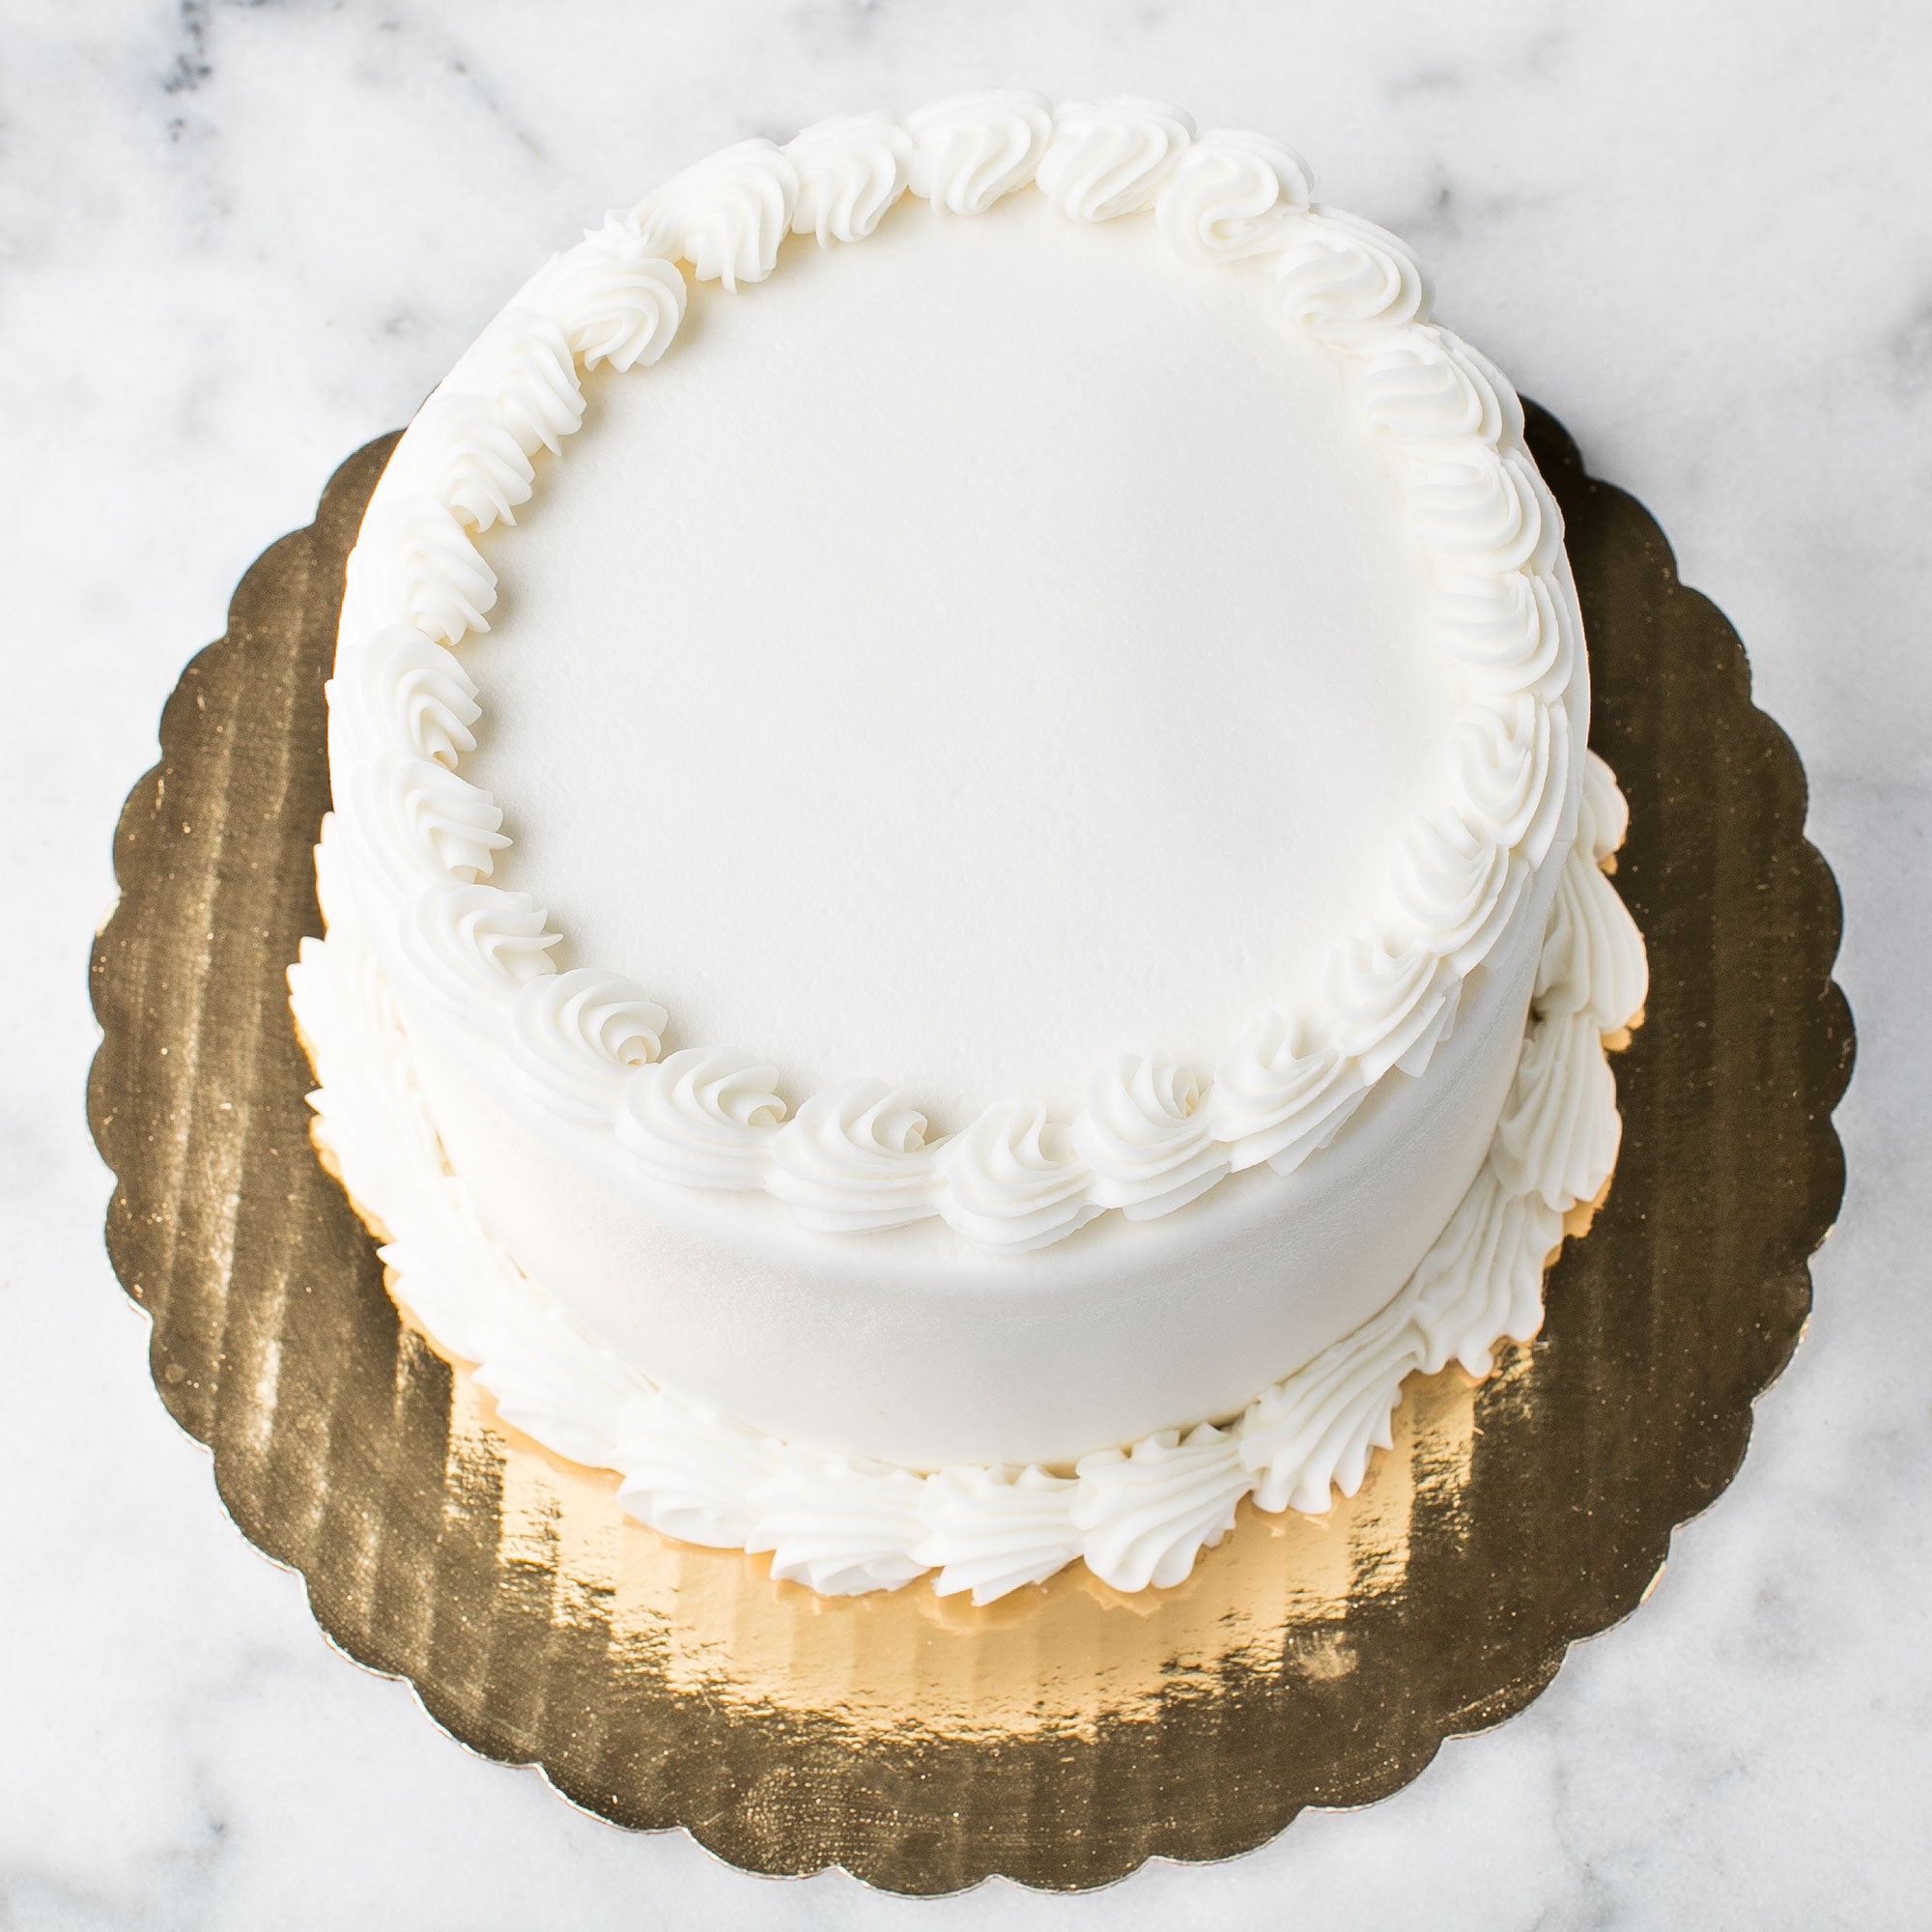 Simple Cake Decorating Ideas That Anyone Can Do — Sum of their Stories  Craft Blog